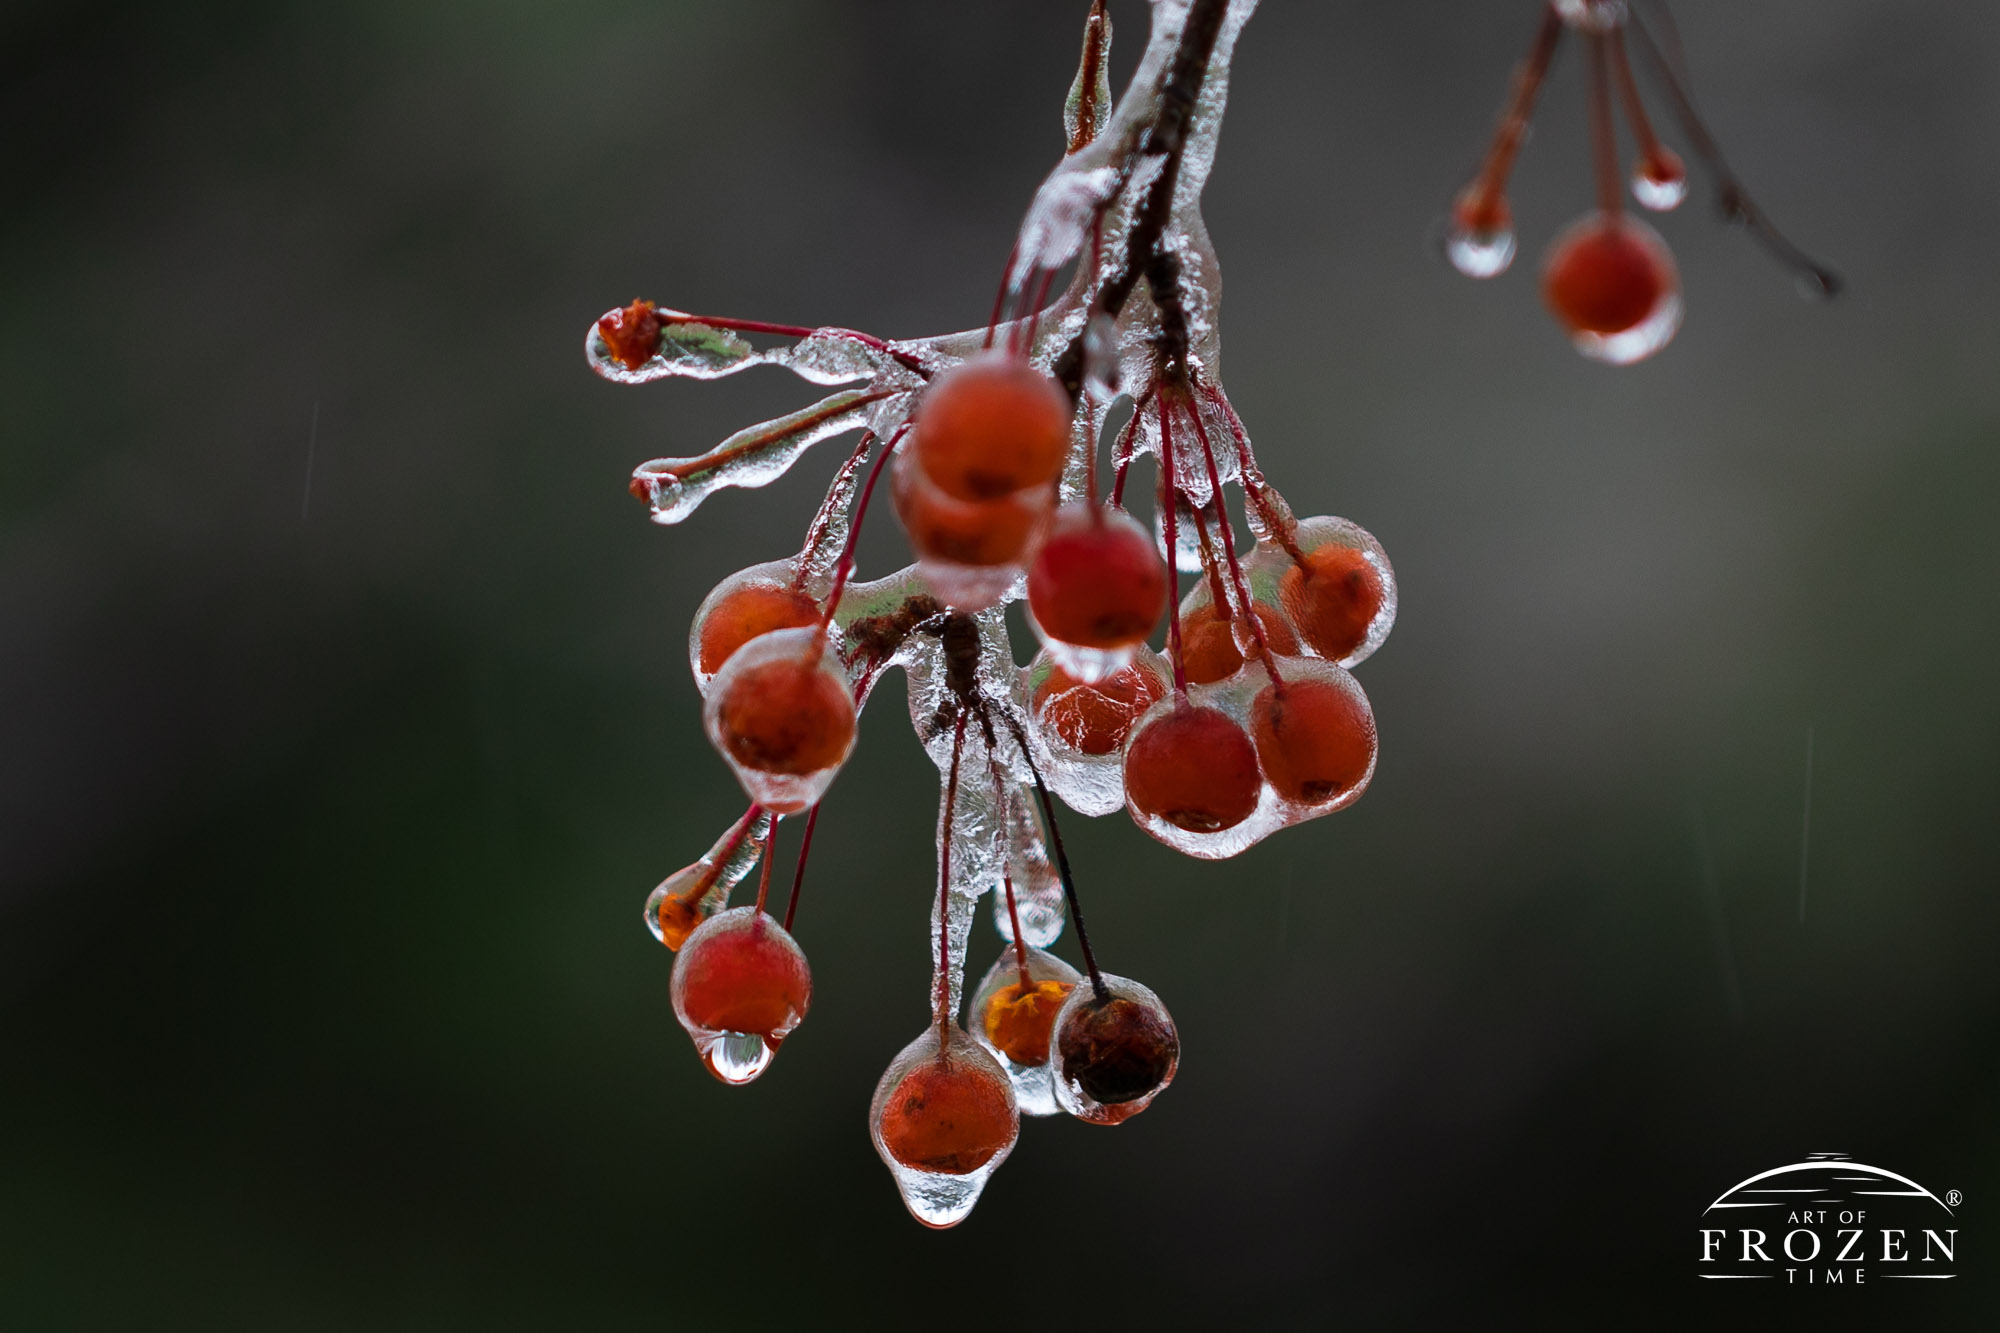 As an ice storm impacts the Miami Valley the bright red crab apples encased in ice hang heavily from frozen tree limbs.